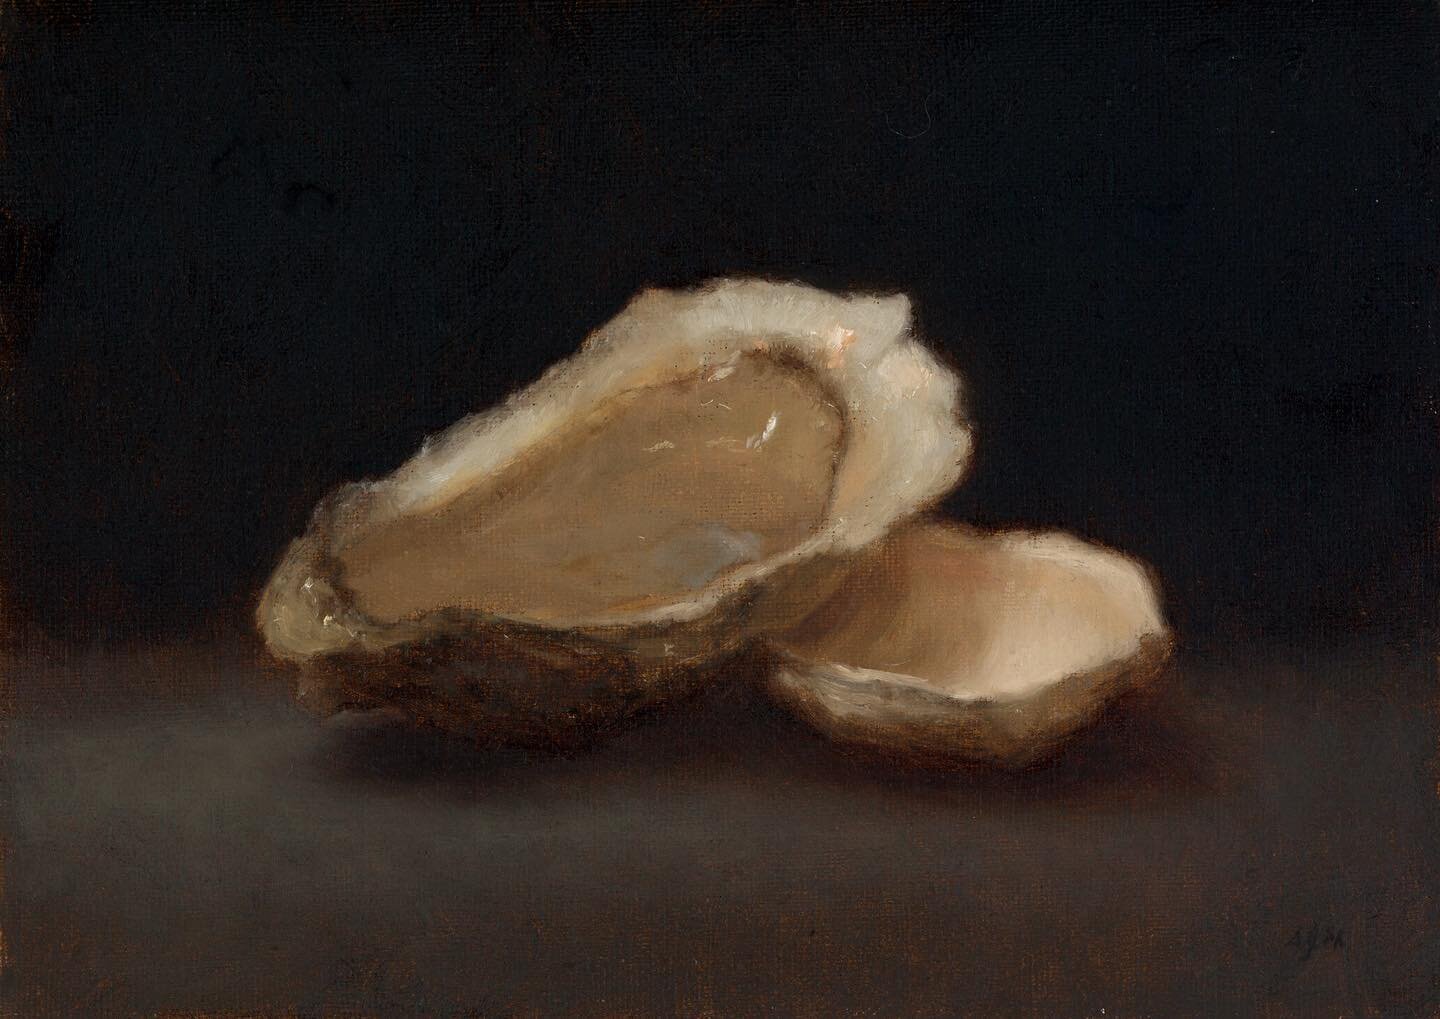 The sparkles of light on this oyster were an absolute delight to capture ✨

#charleston #charlestonart #oyster #oysterpainting #oysterart